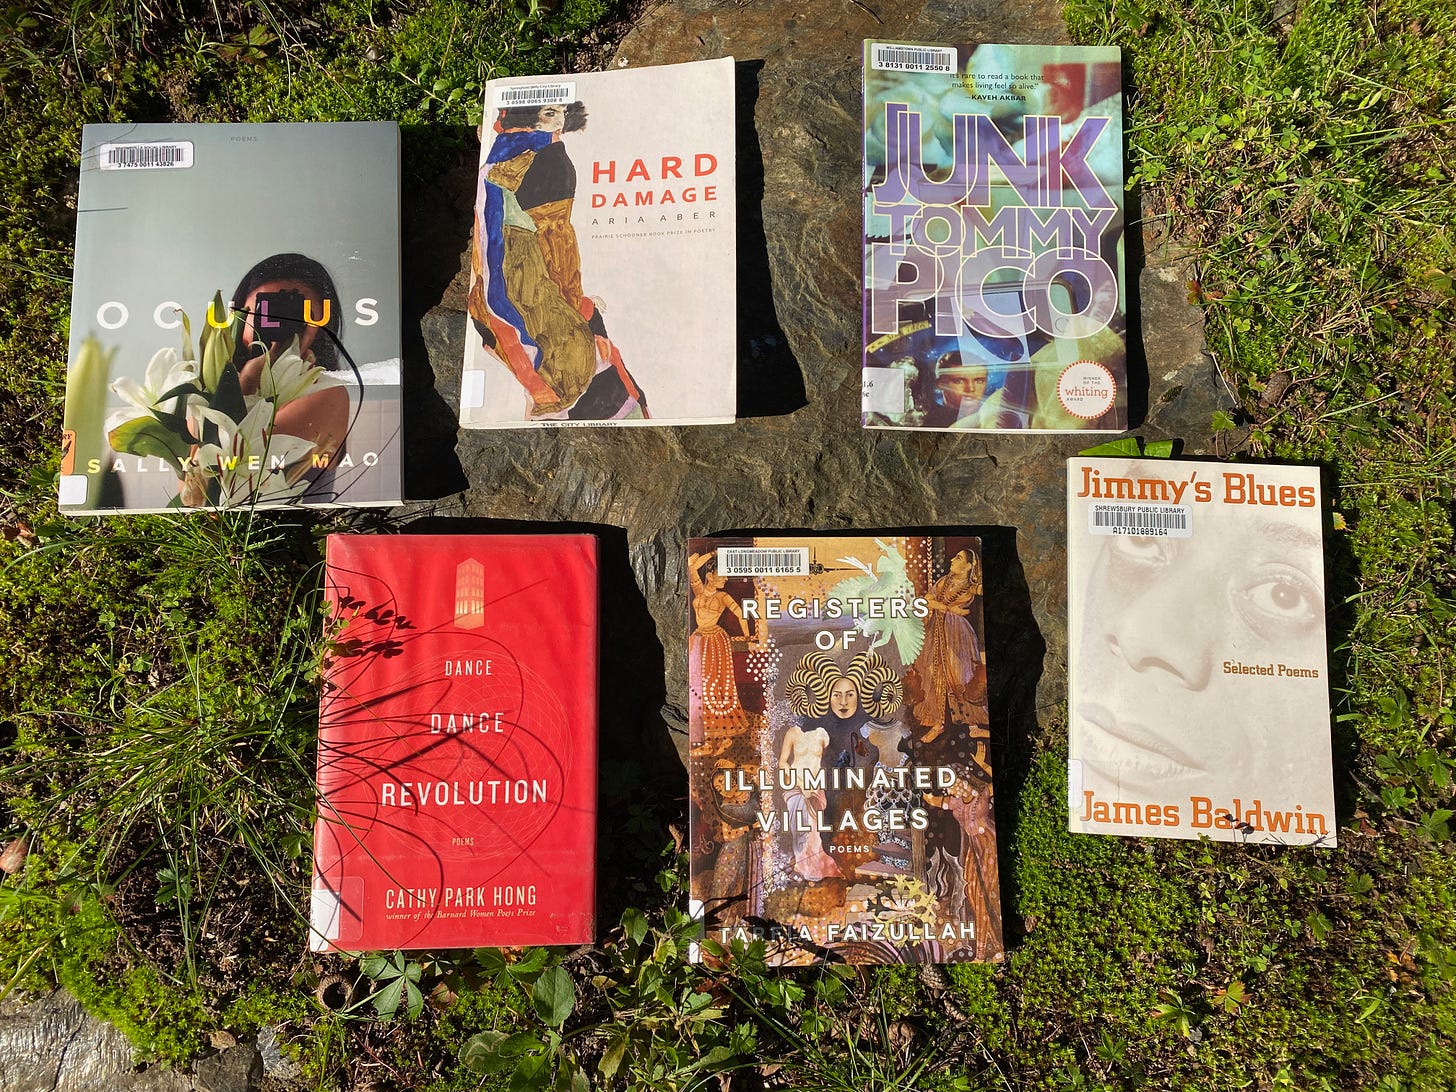 Six poetry books lying face up on a sunny rock in a grassy yard.